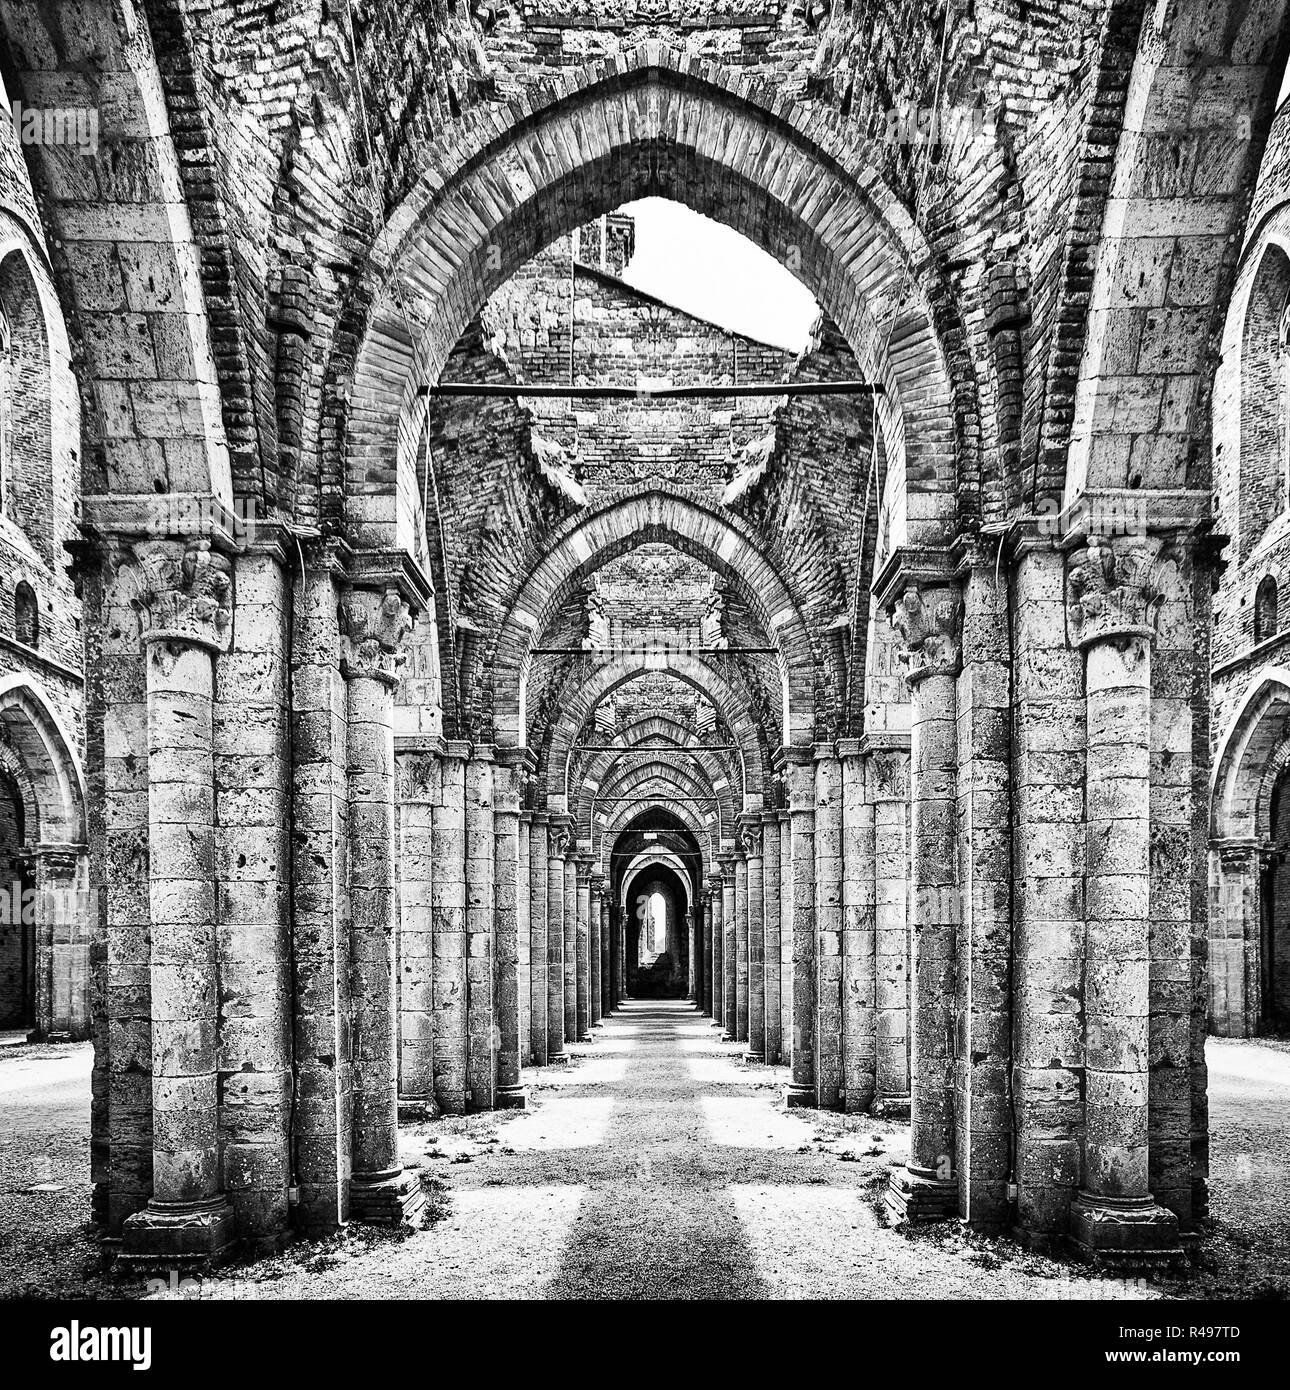 Historic ruins of abandoned abbey in black and white Stock Photo